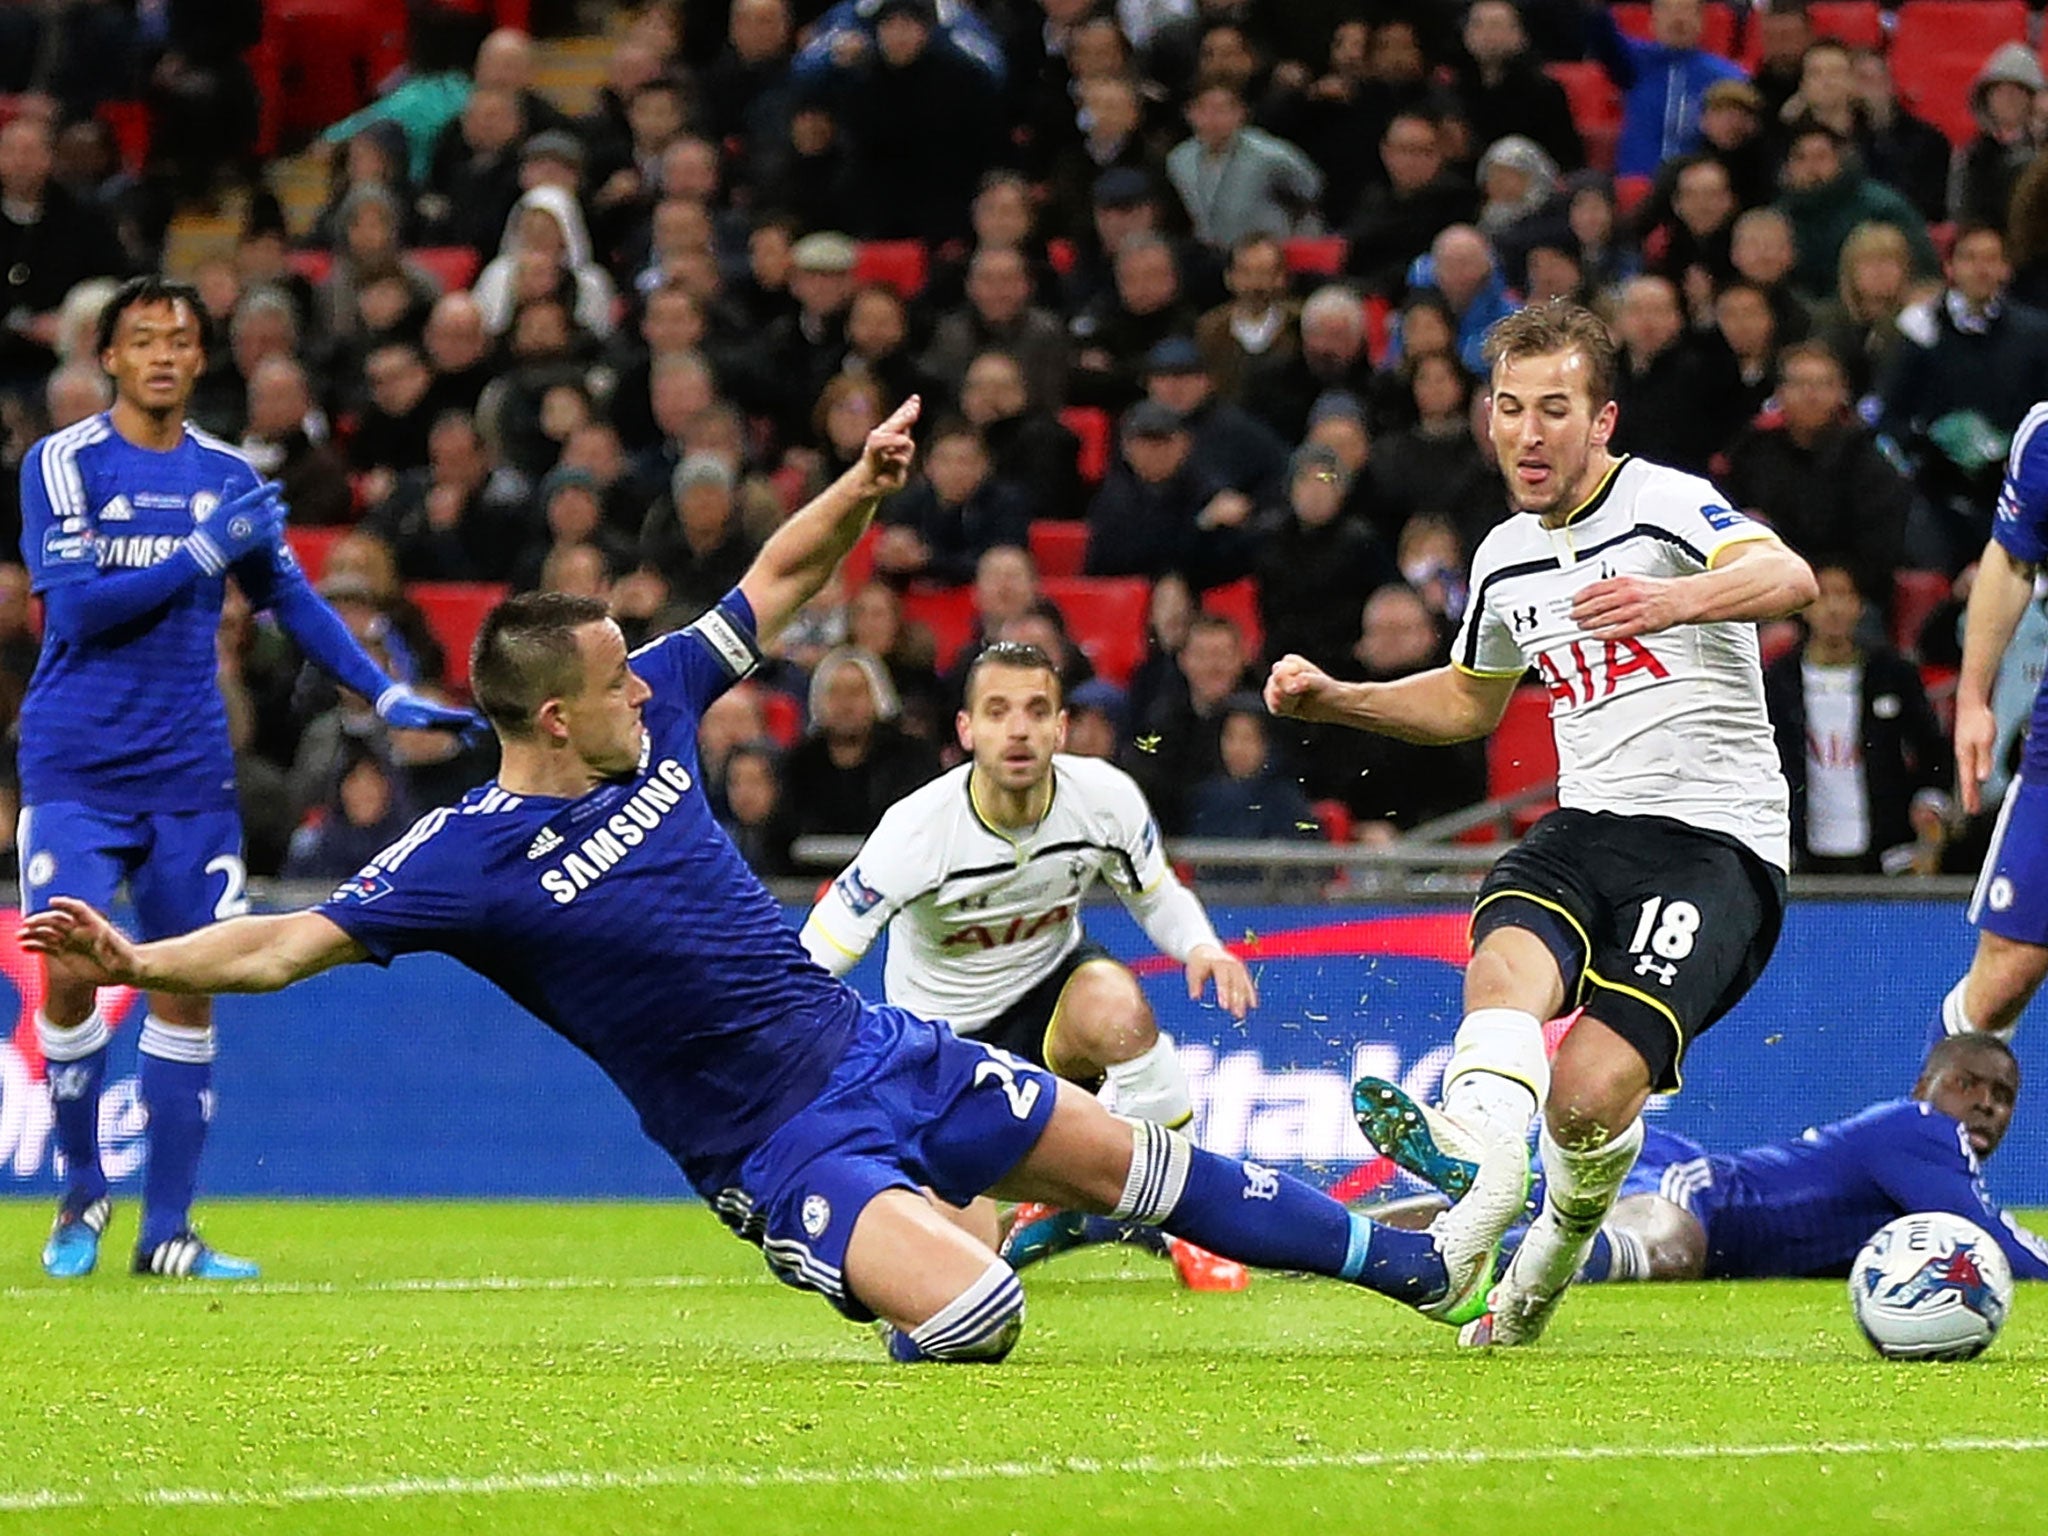 Harry Kane tries a rare shot for Spurs as John Terry slides in to snuff out the danger